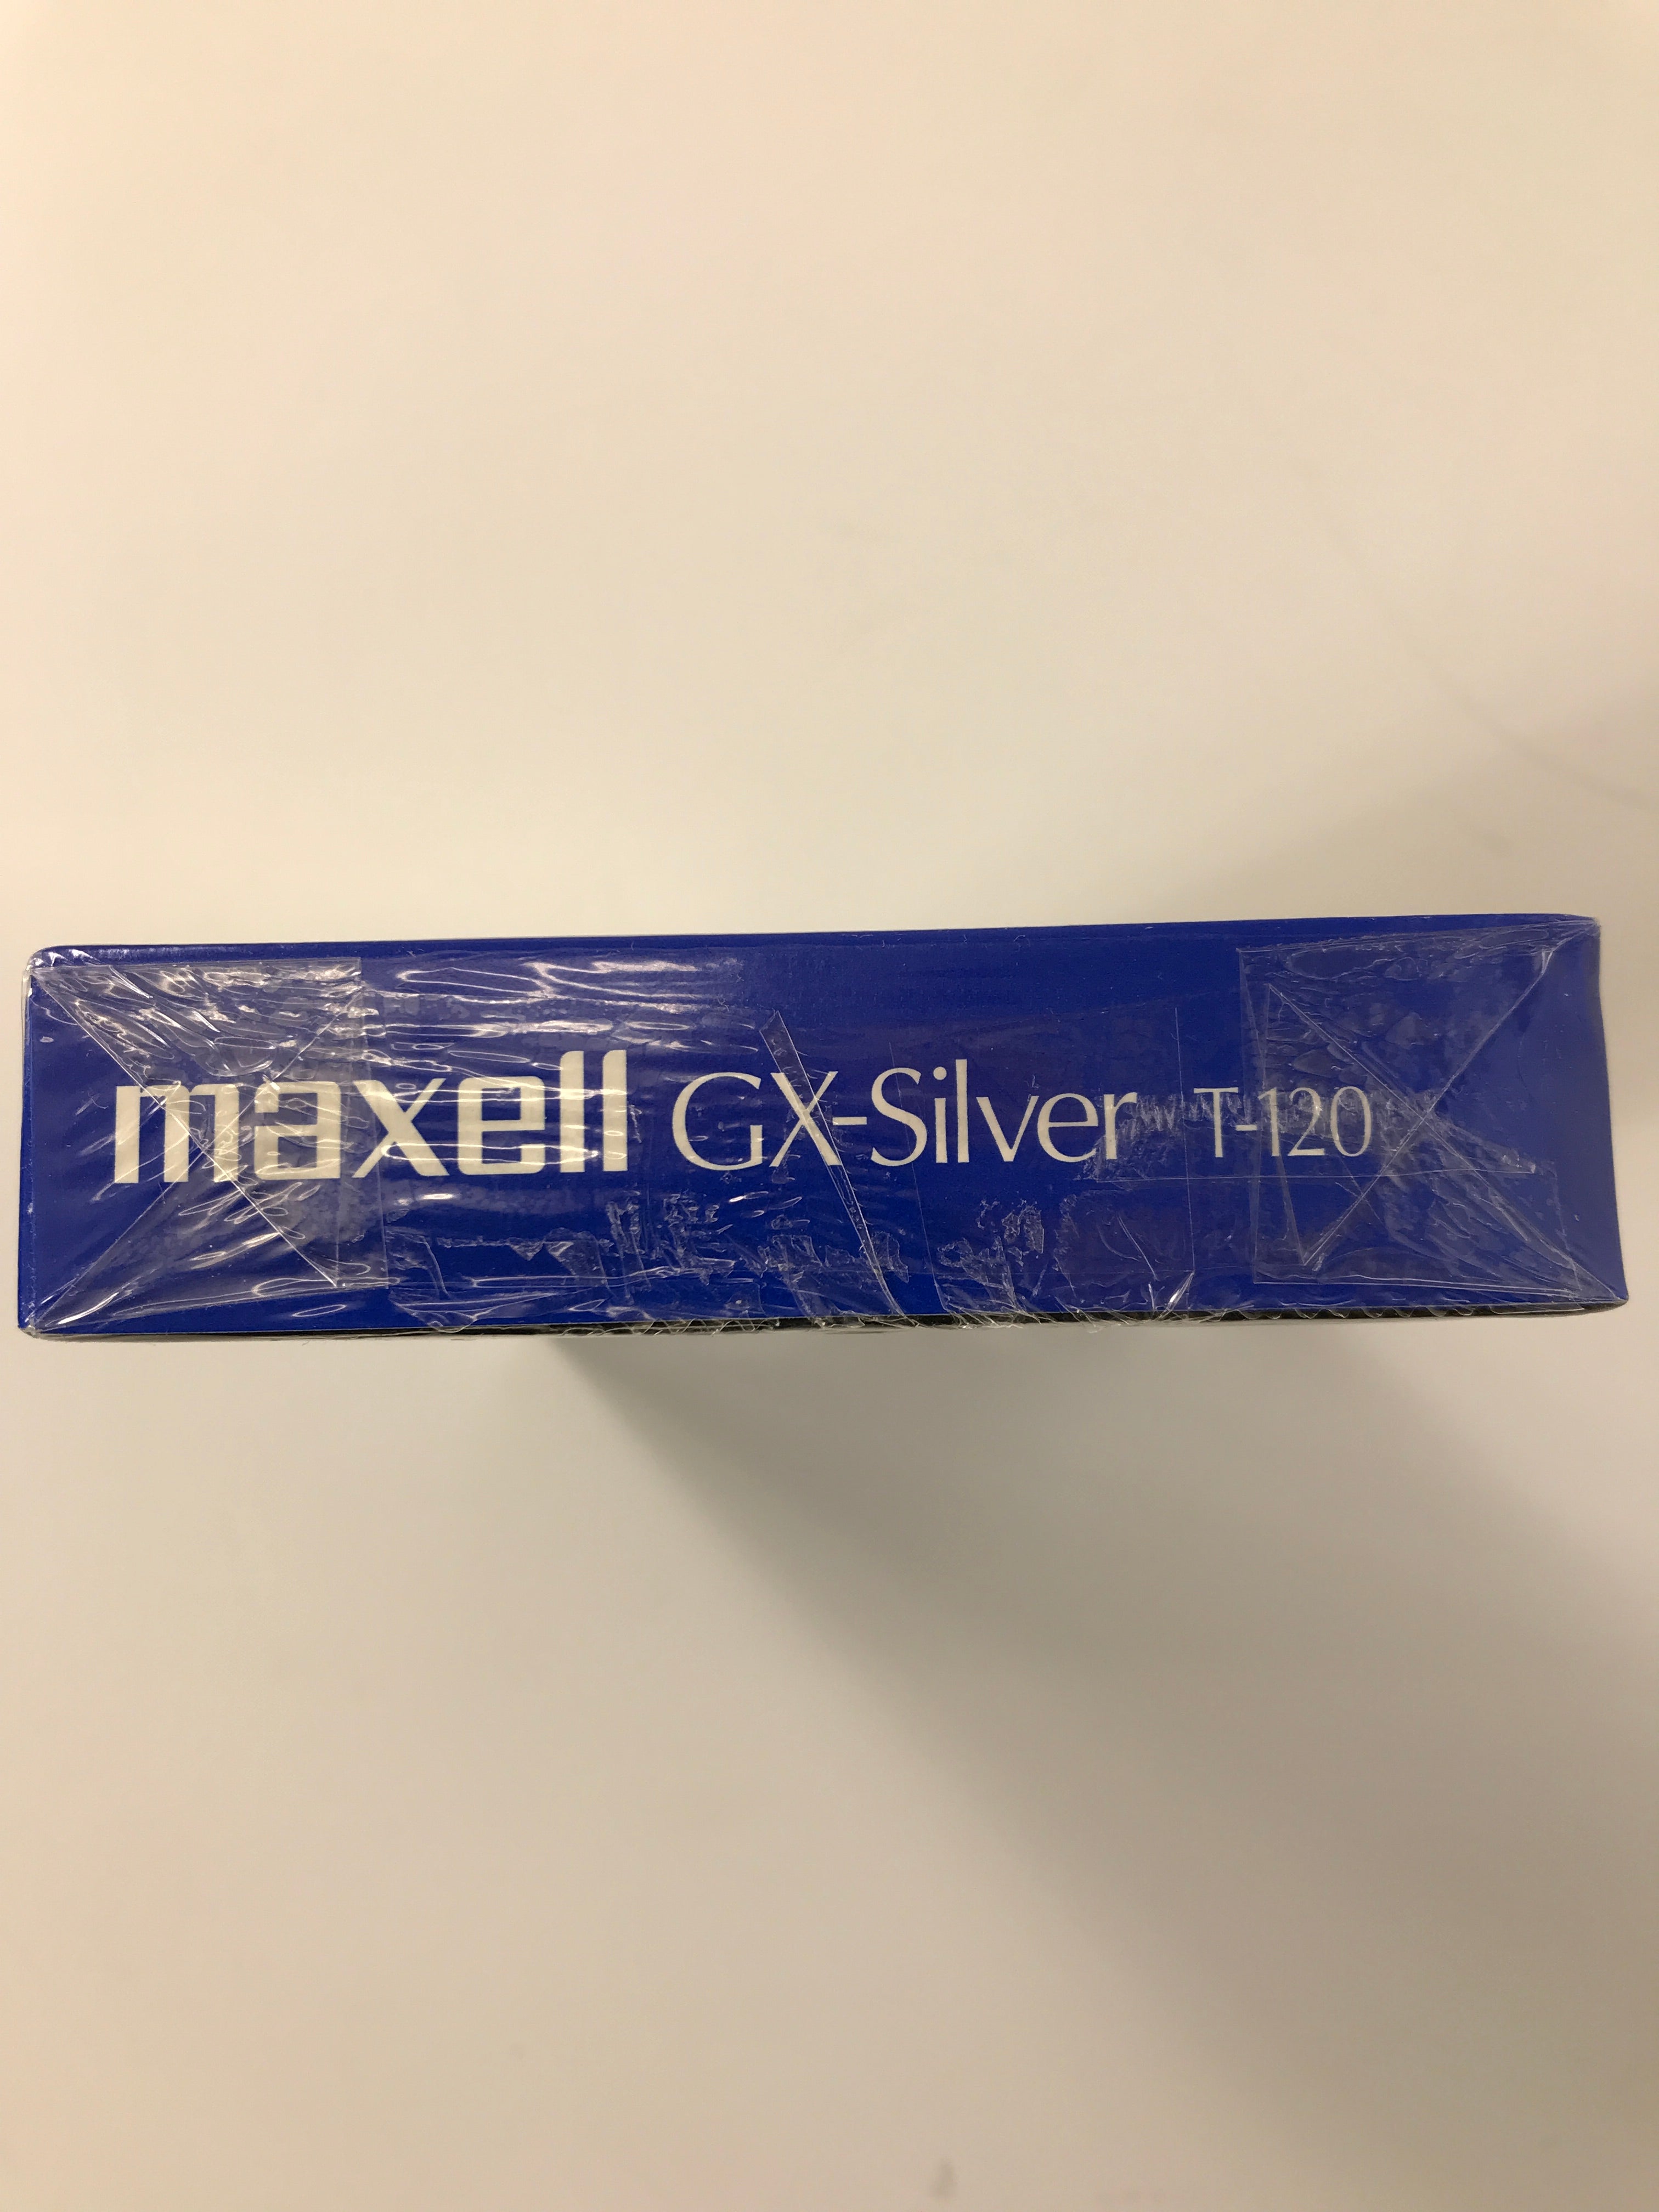 Maxell GX-Silver Video Cassette T-120 *New*